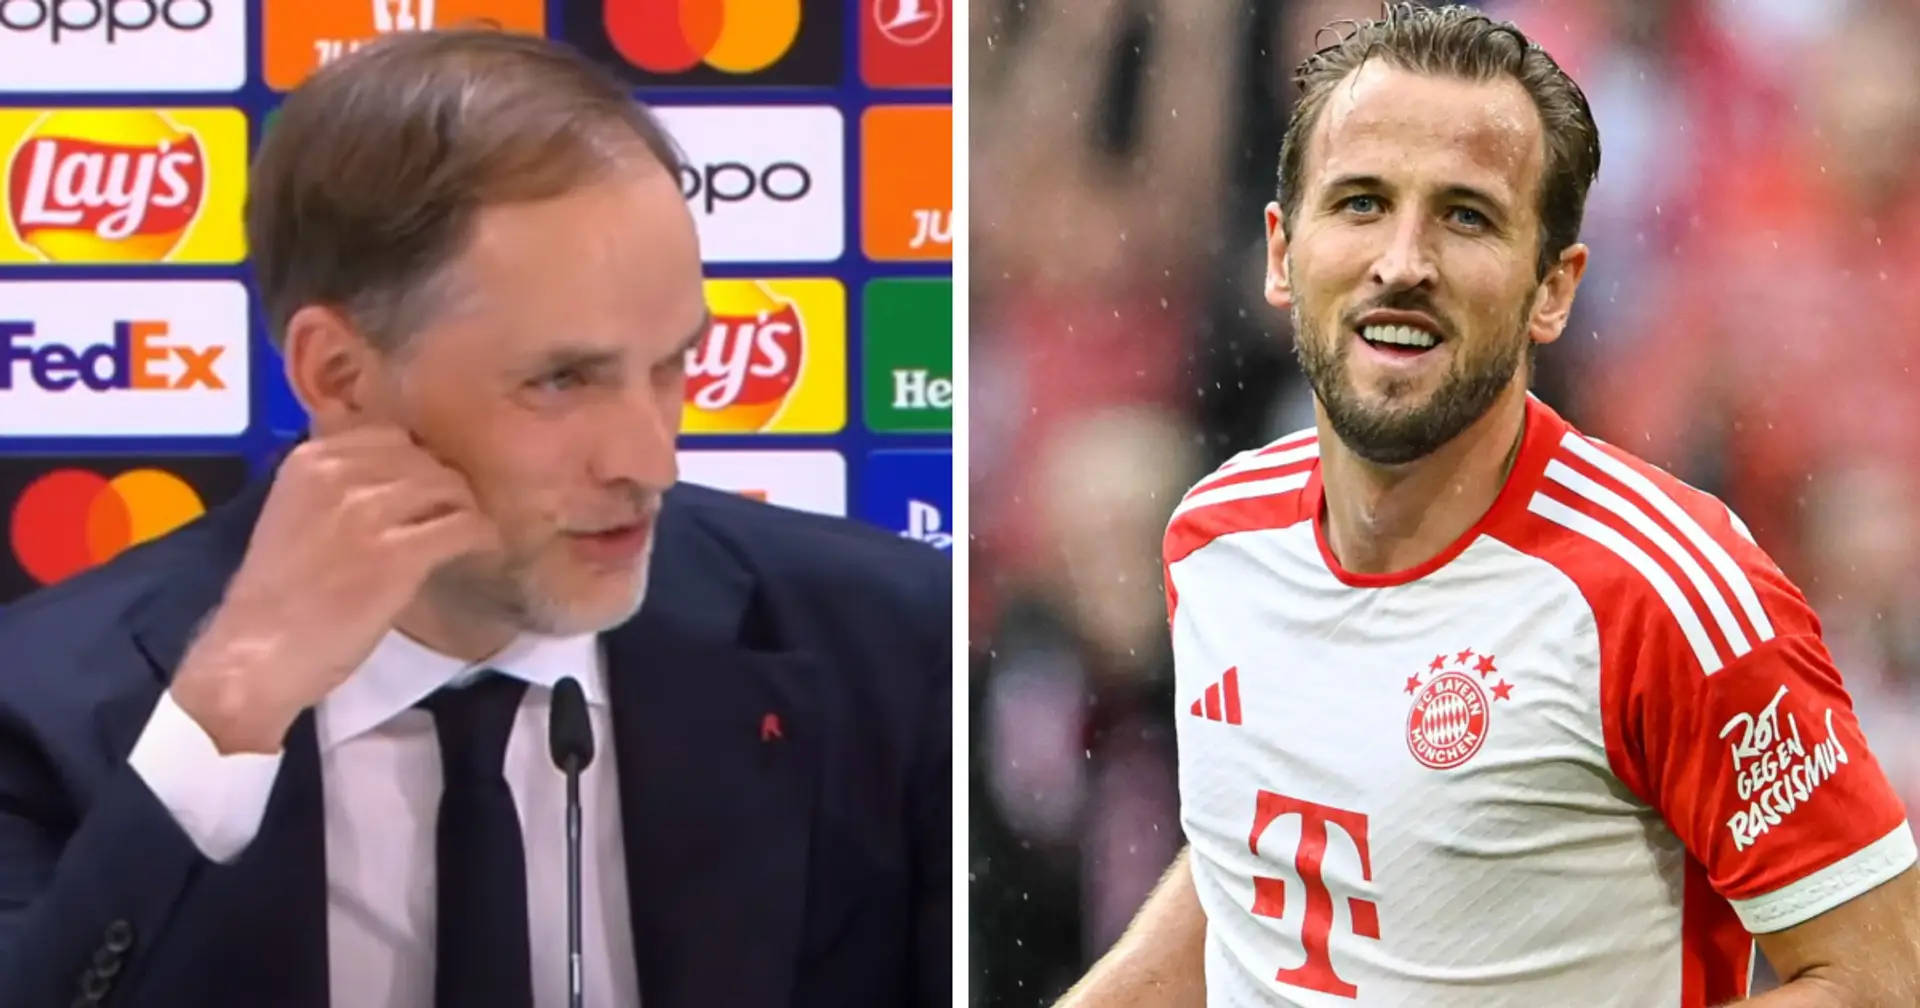 'Look at him, he looks healthy and in good shape': Thomas Tuchel reveals the habit he got from Harry Kane